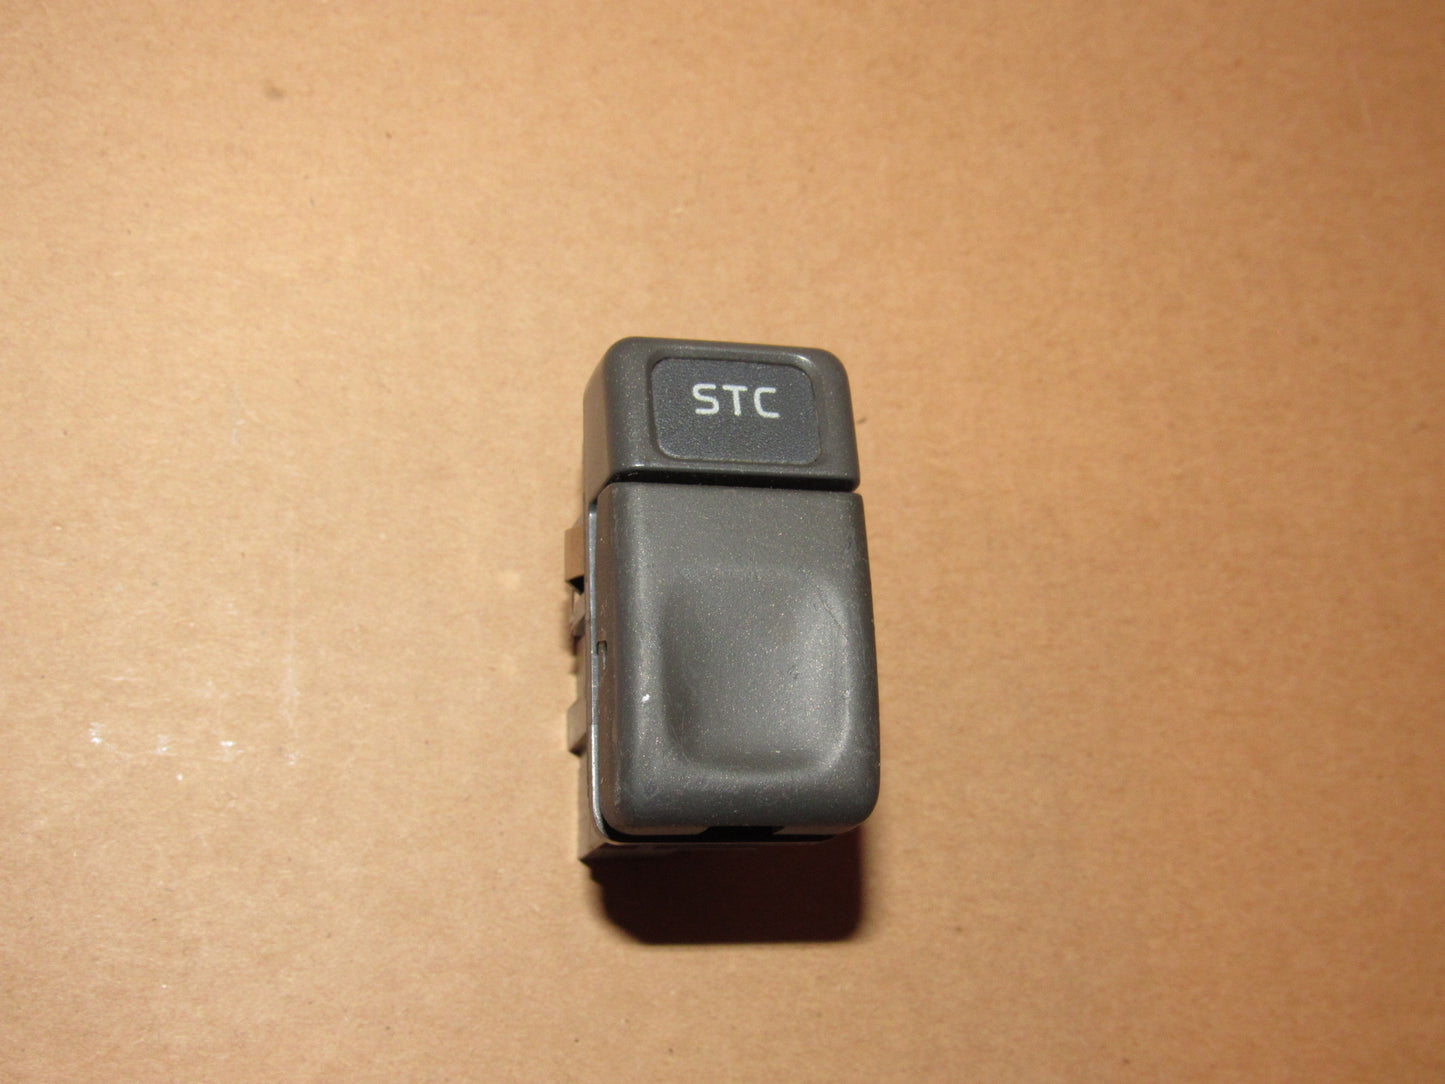 01 02 03 04 Volvo V70 OEM Stability Traction Control STC Switch